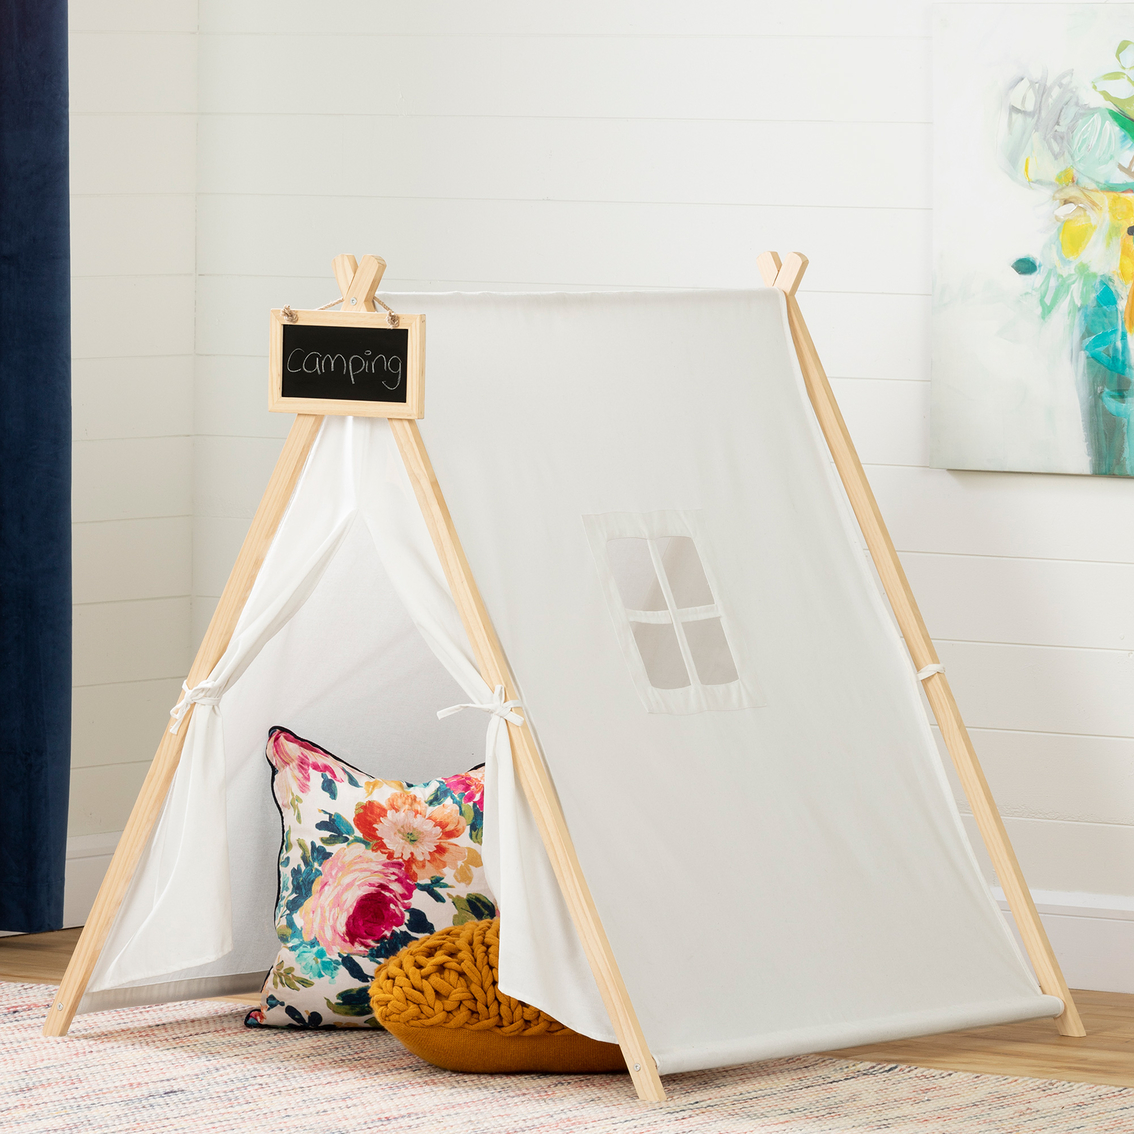 South Shore Sweedi Play Tent with Chalkboard - Image 3 of 10